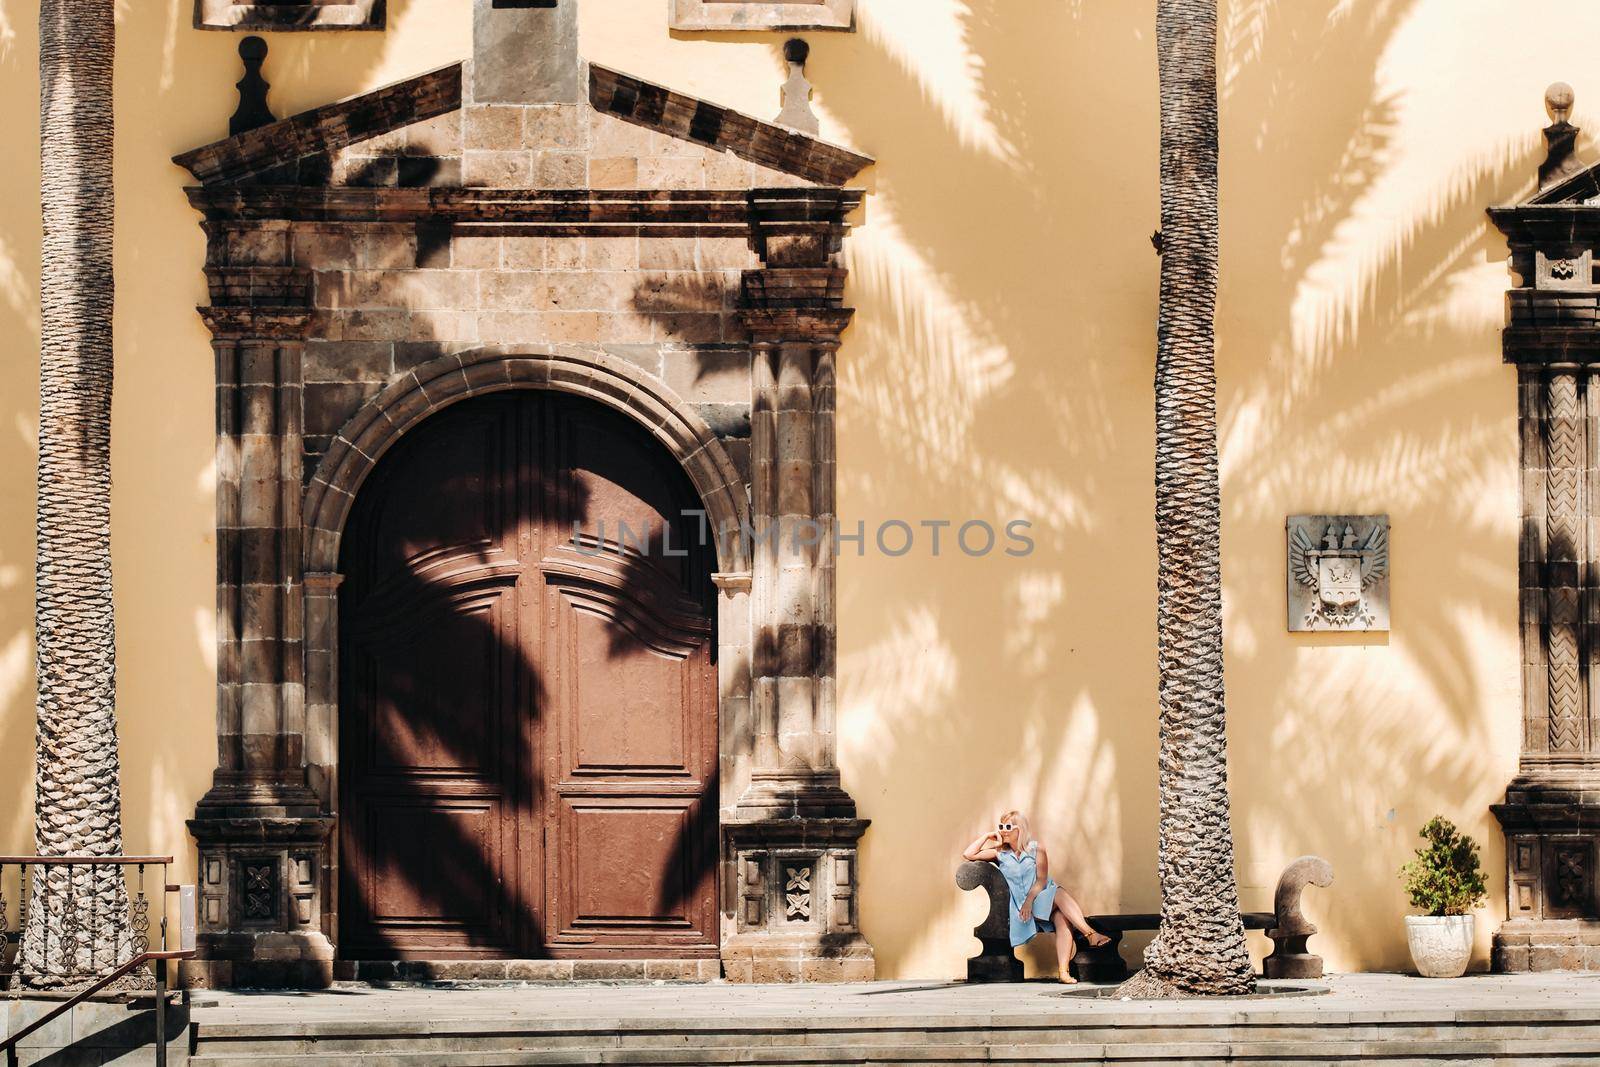 A girl in a blue dress sits on a bench in the old town of Garachico on the island of Tenerife on a Sunny day.A tourist walks in the old town on the island of Tenerife Canary Islands.Spain by Lobachad